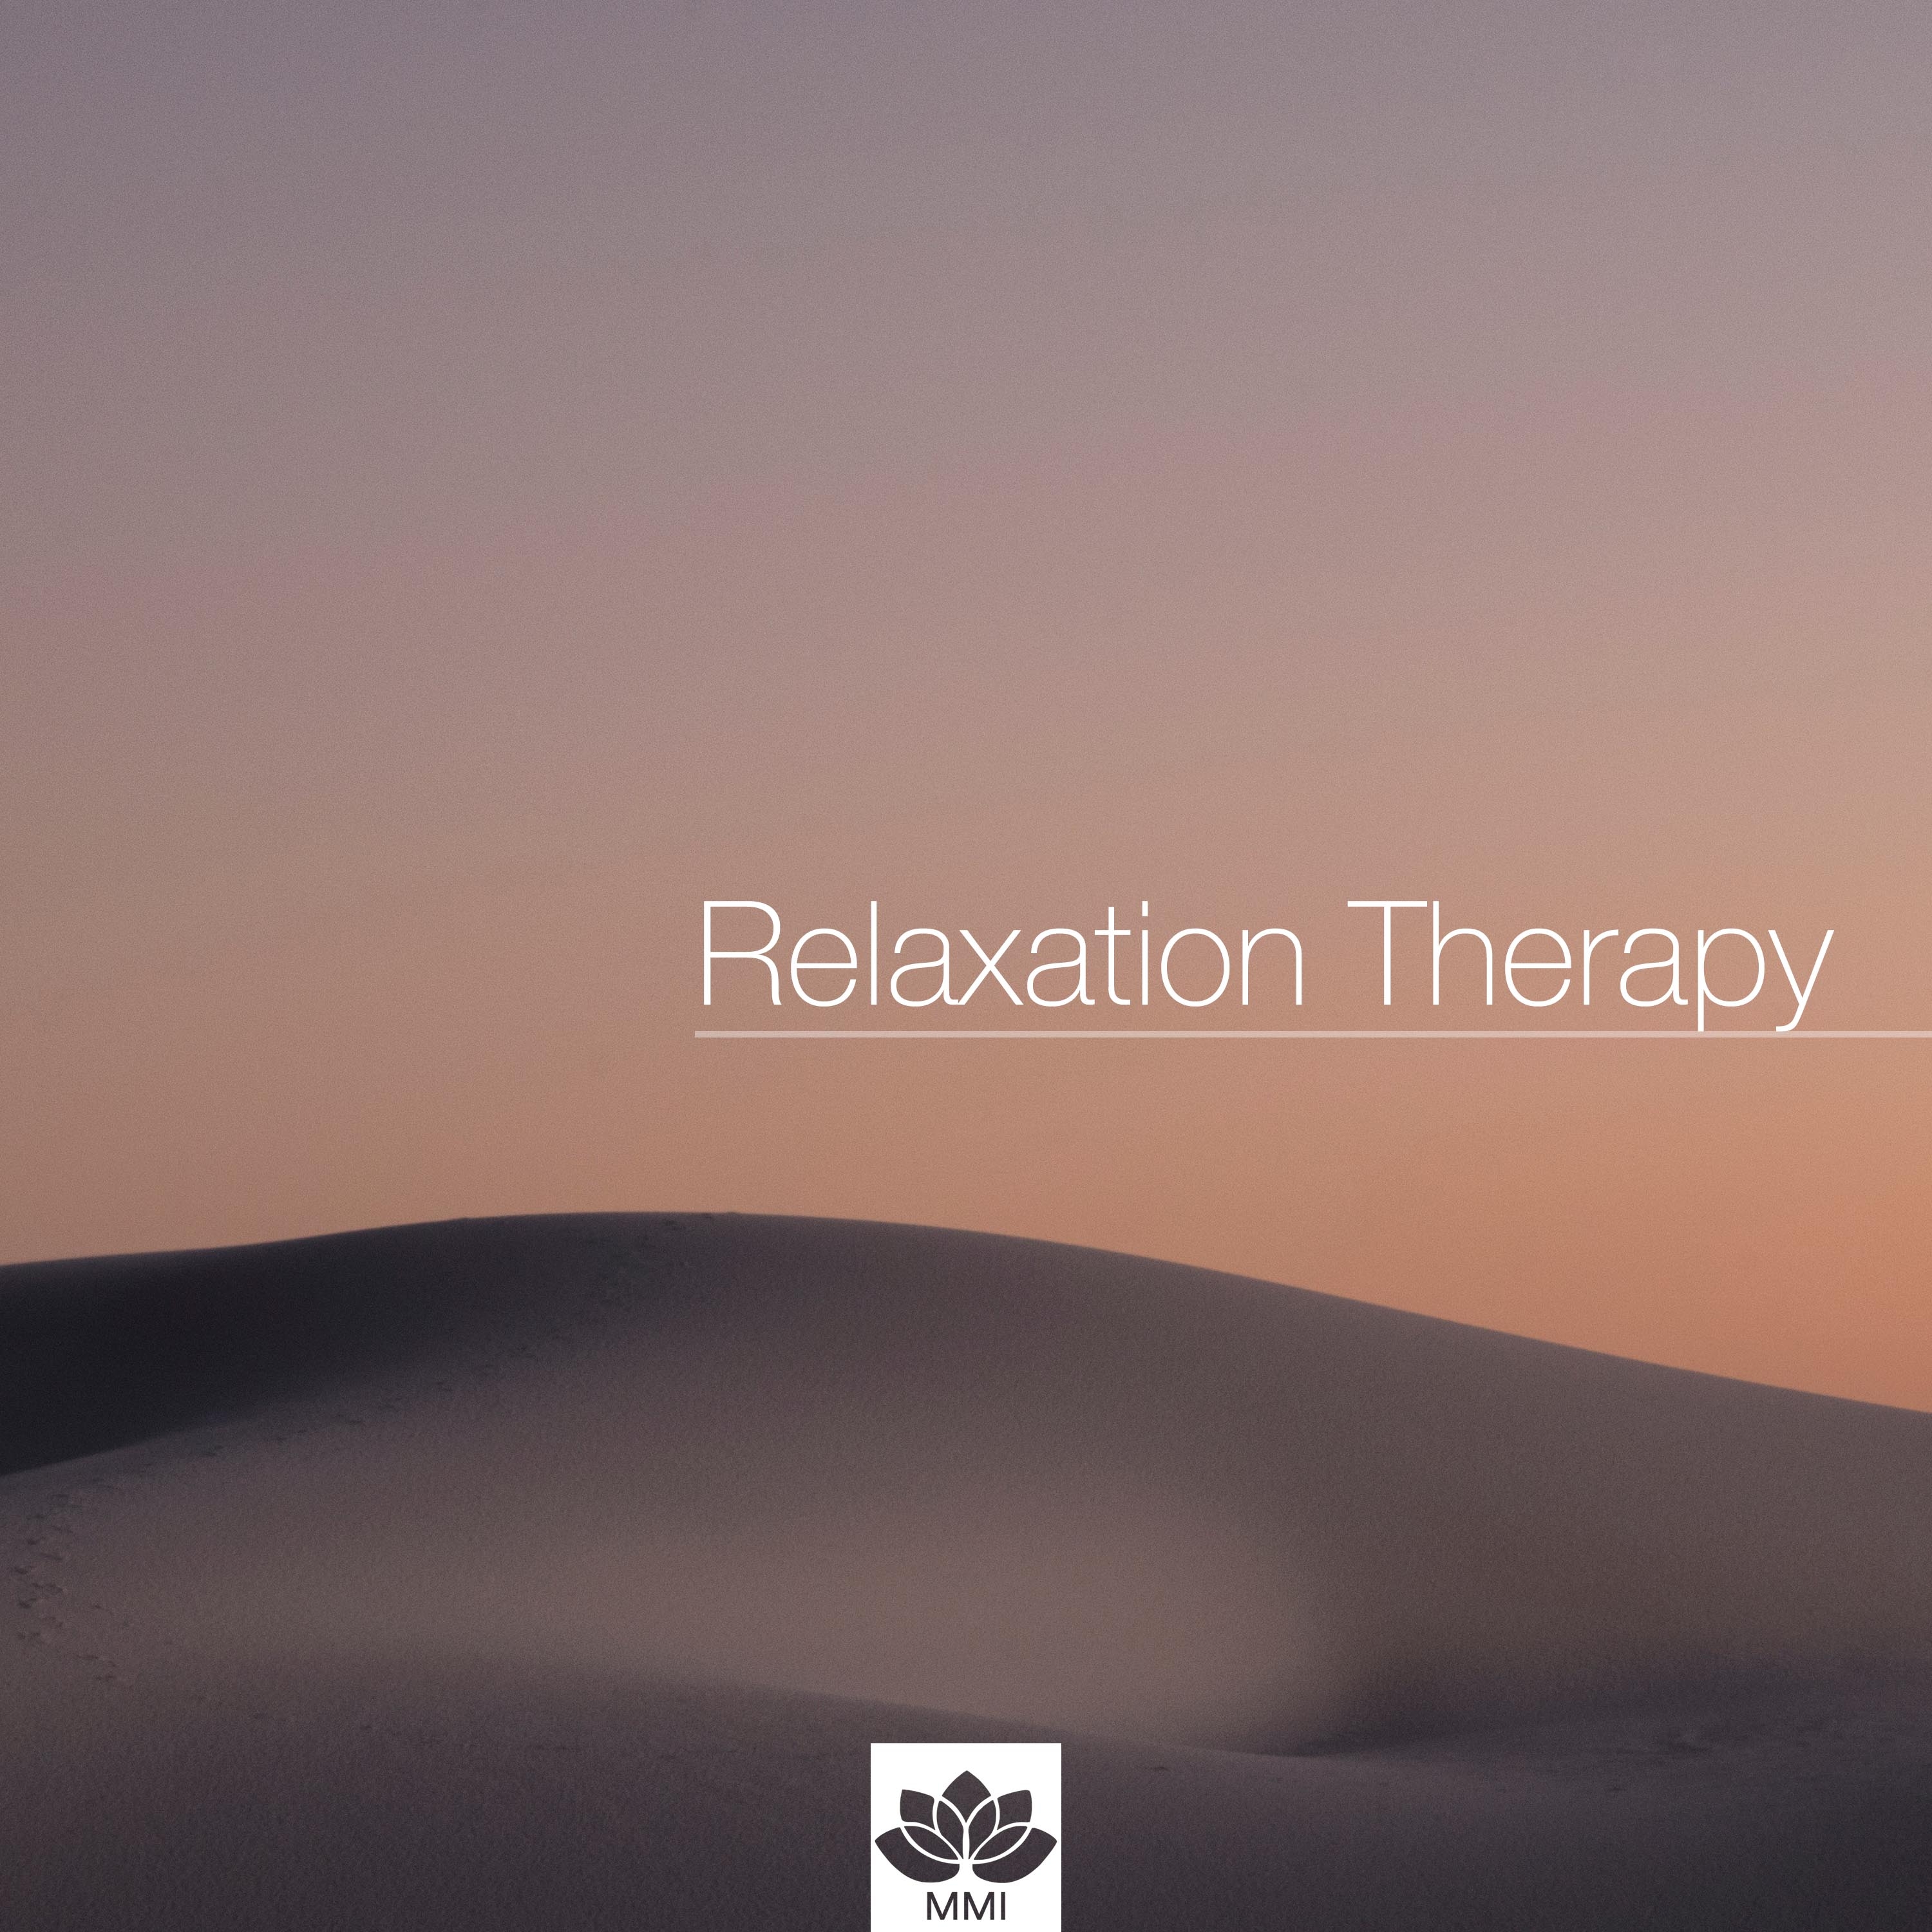 Relaxation Therapy: The Best Relaxing Music for Deep Sleep, Meditation, Yoga, Peace